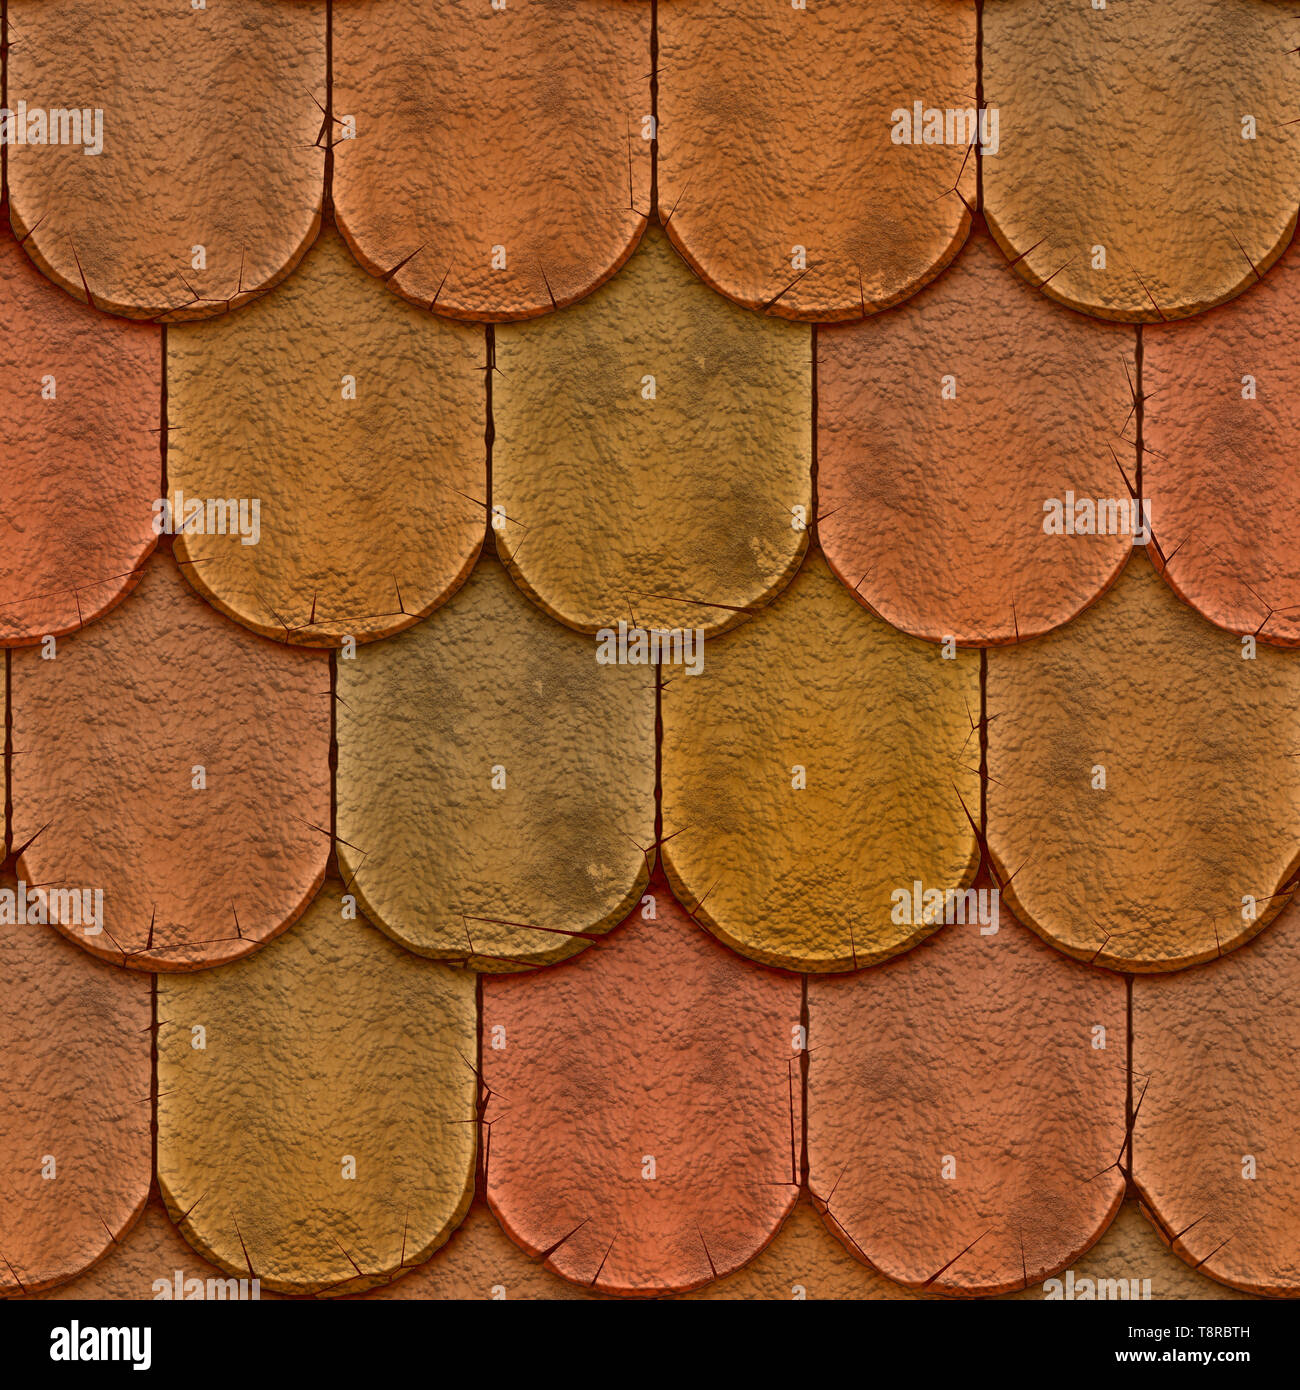 Clay Shingles Roofing Seamless Texture Tile Stock Photo